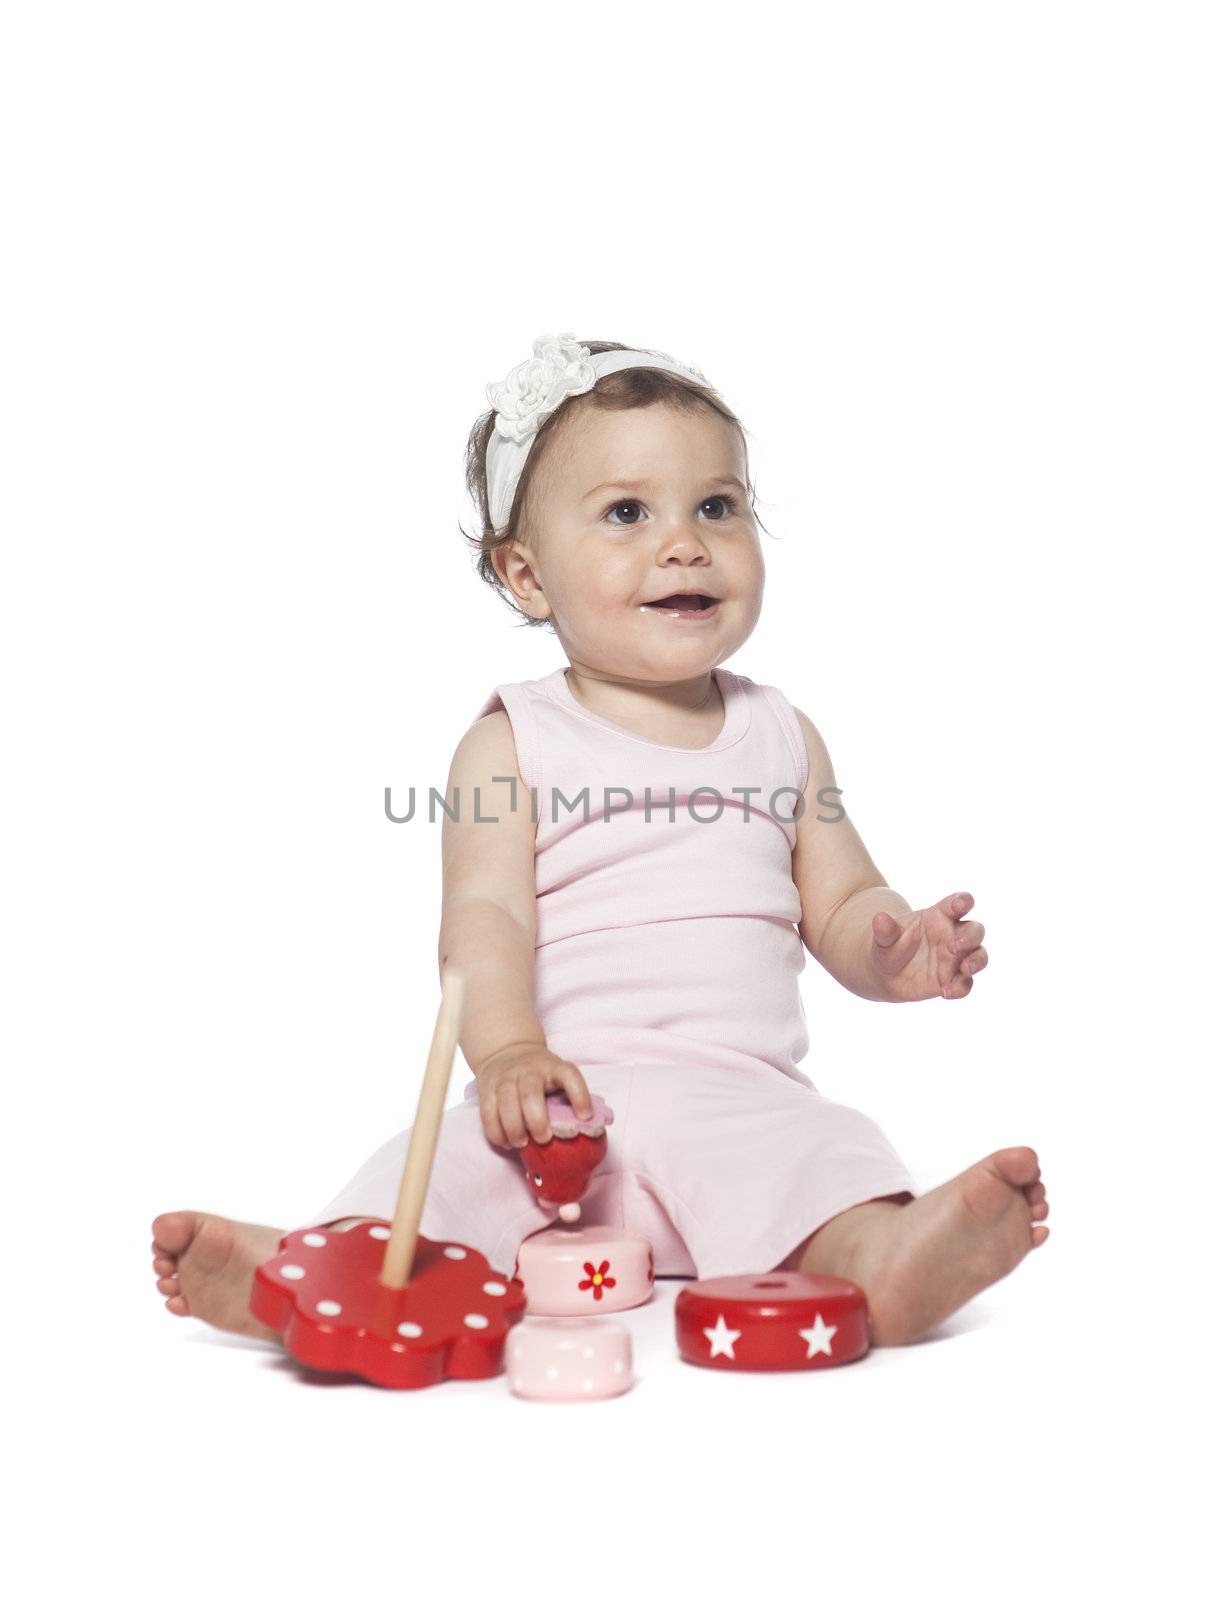 Baby in pink clothes playing with a red toy isolated on white